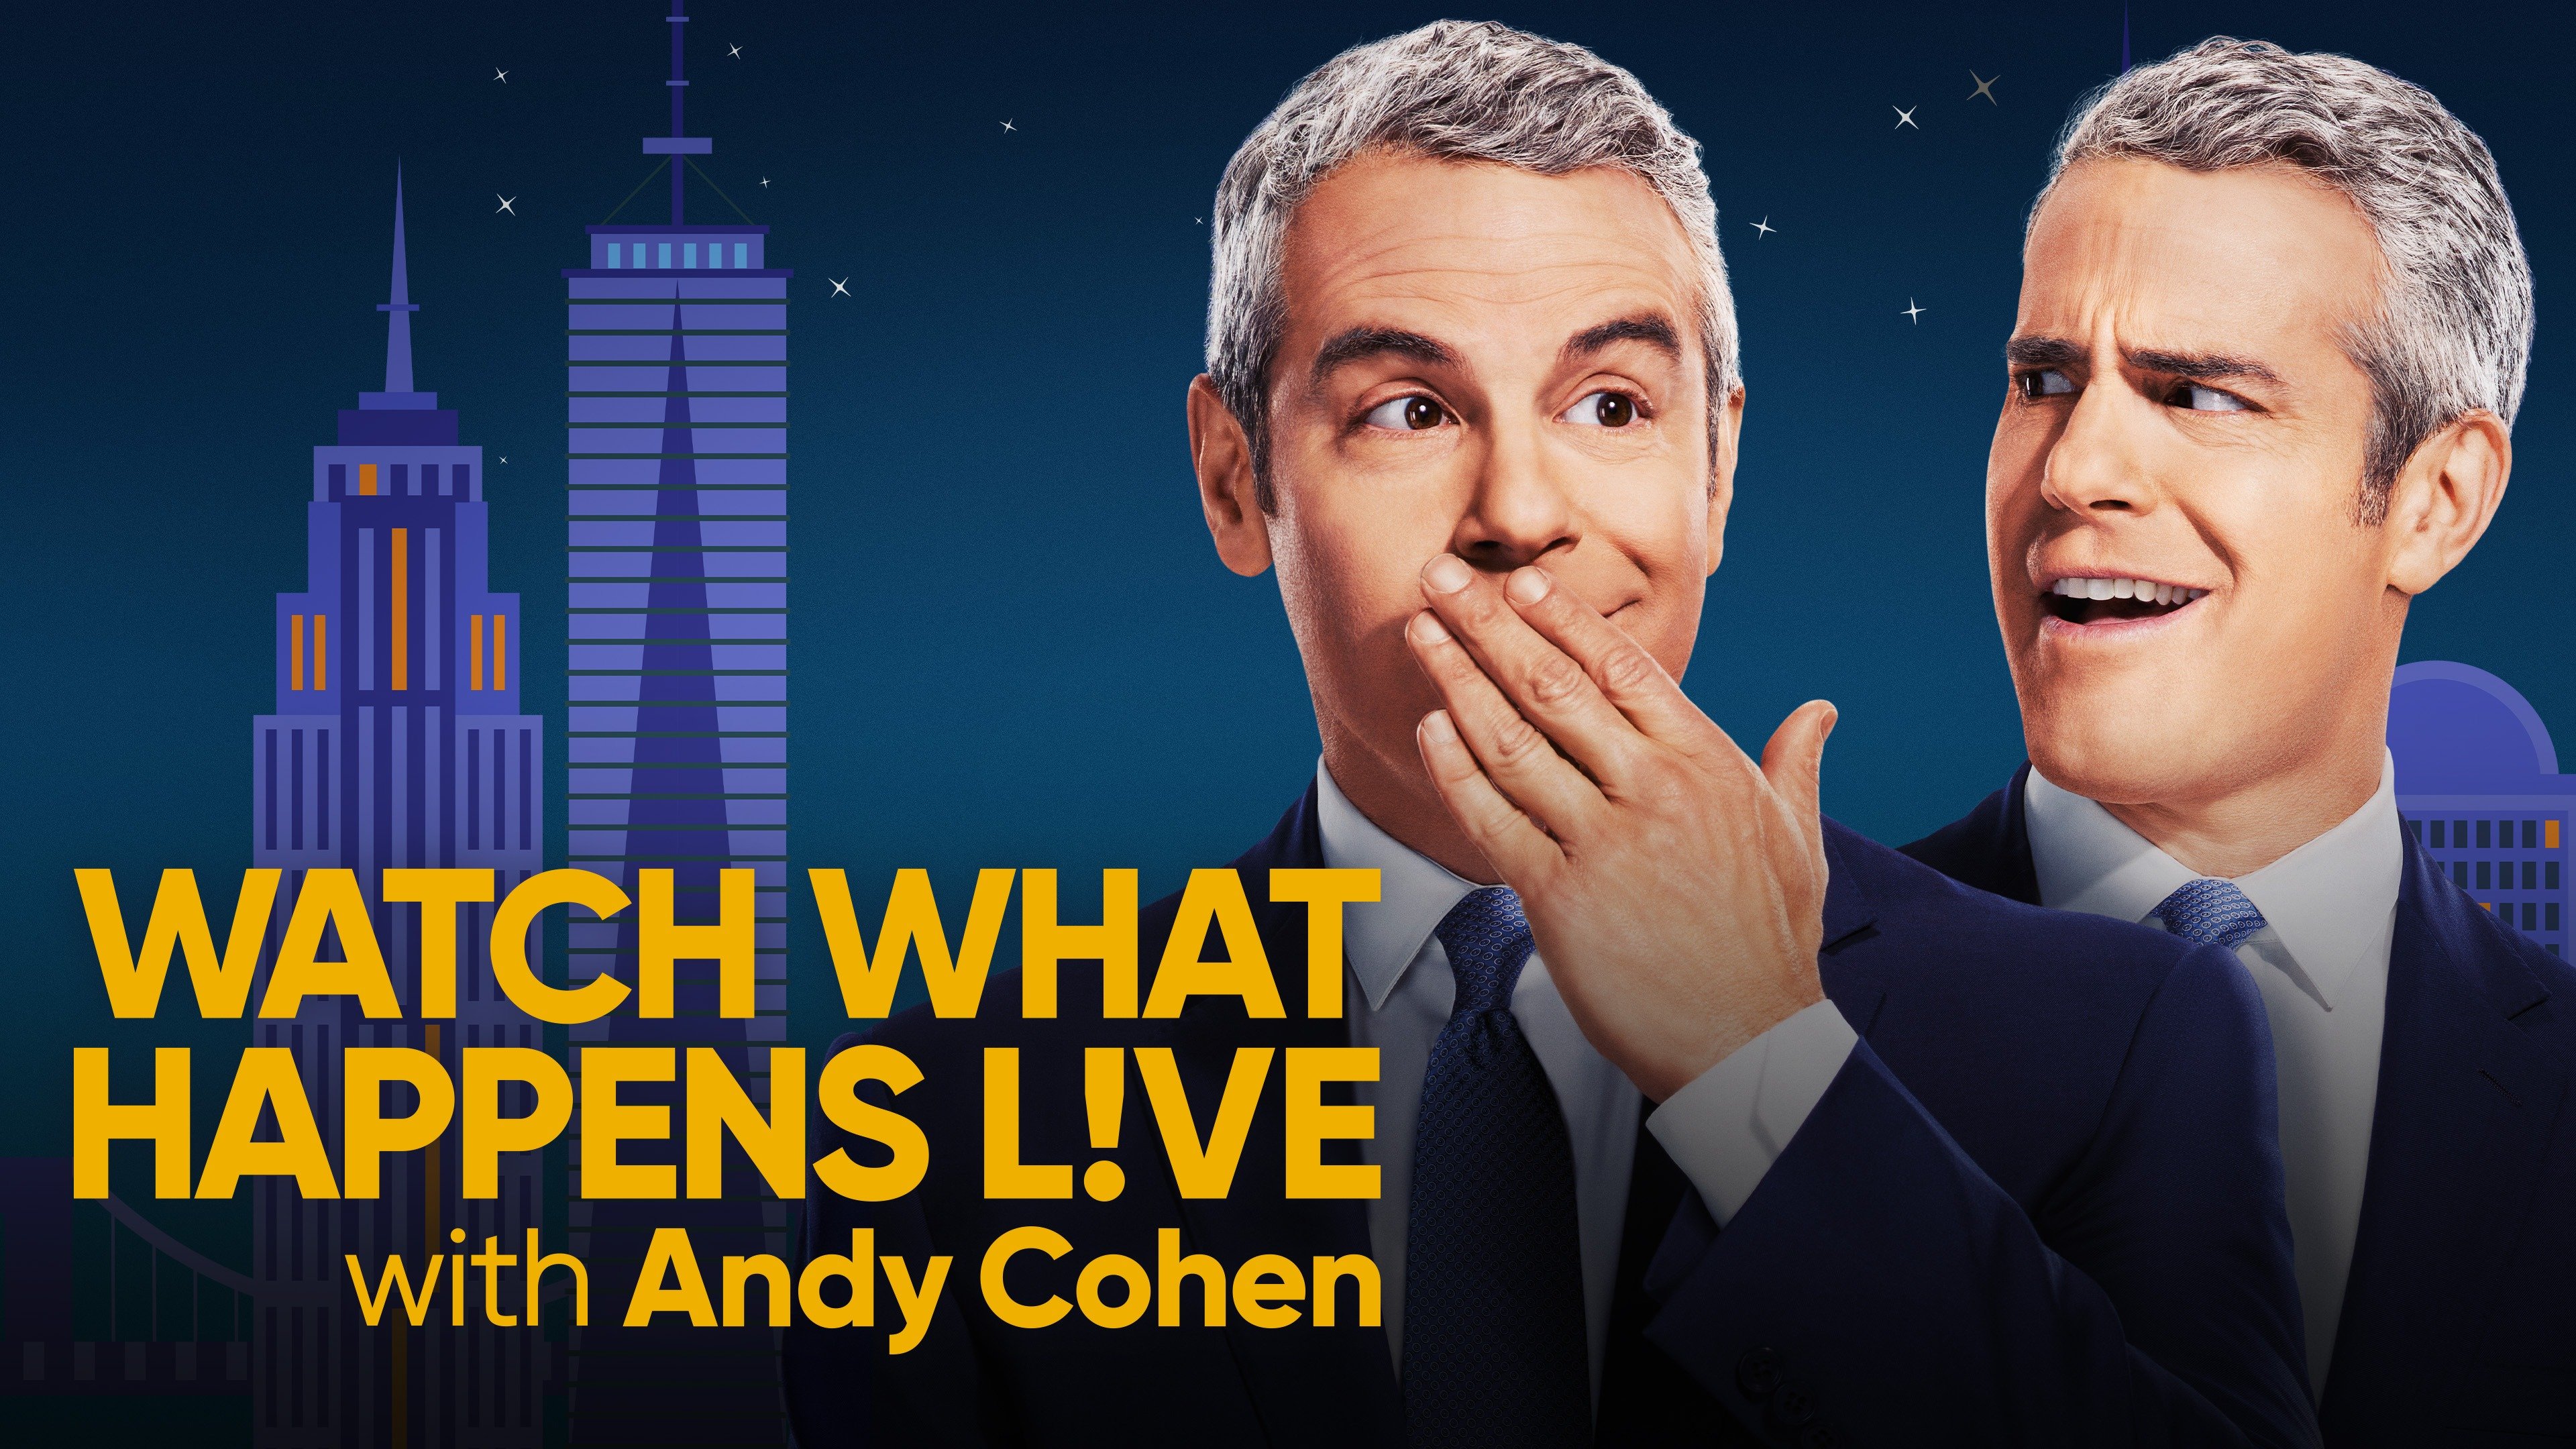 Stream 'Watch What Happens Live': How to Watch Online